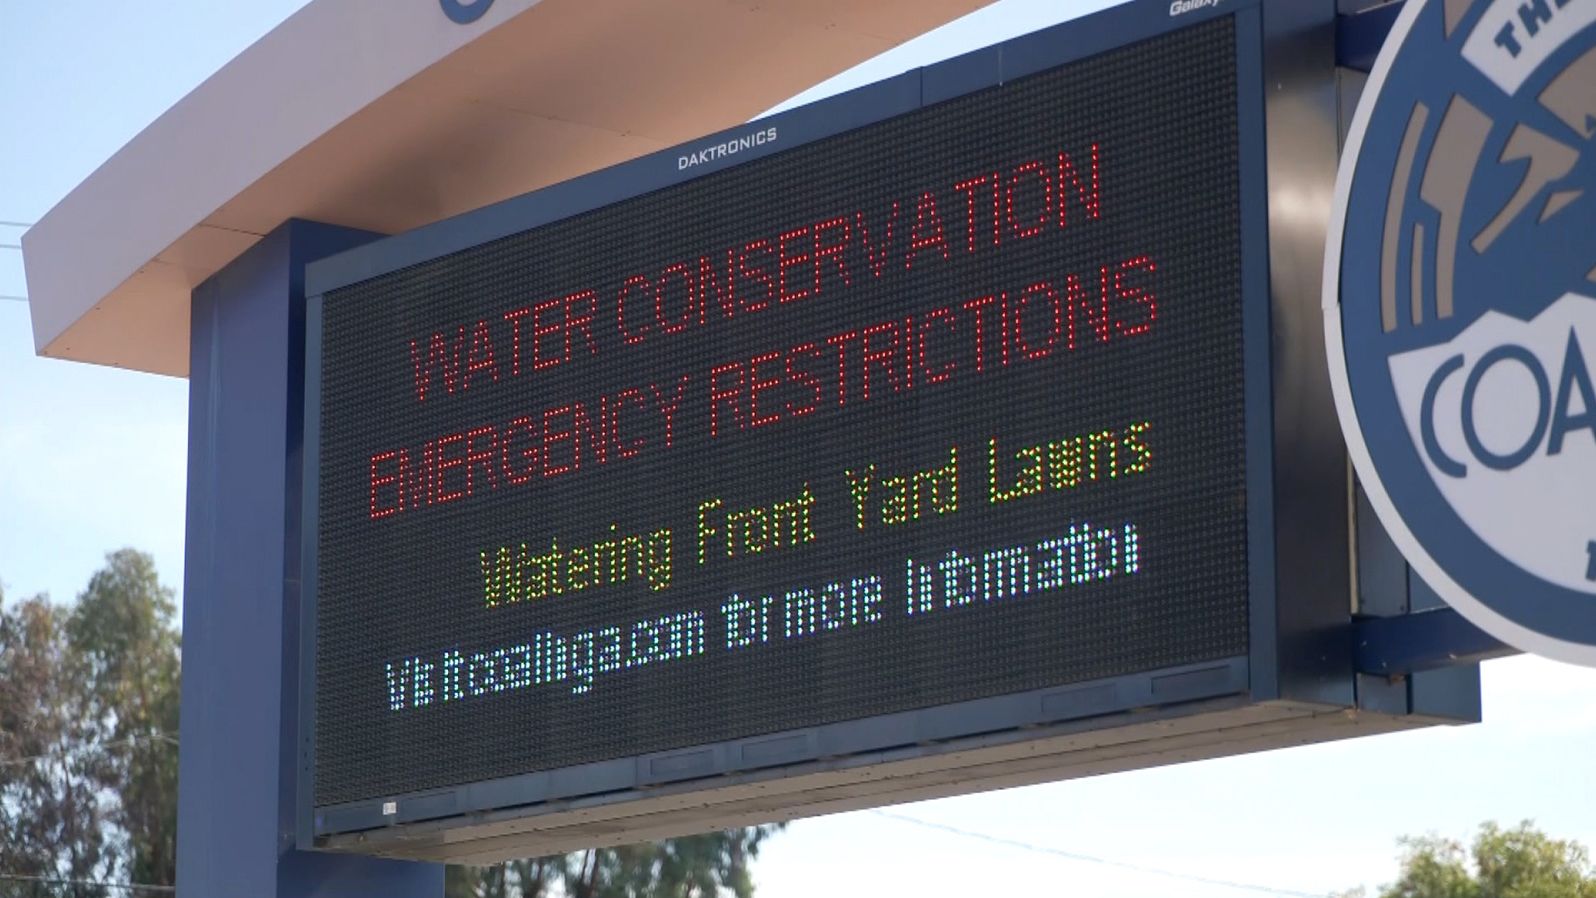 The Coalinga city sign warns residents against watering front lawns amid the drought.